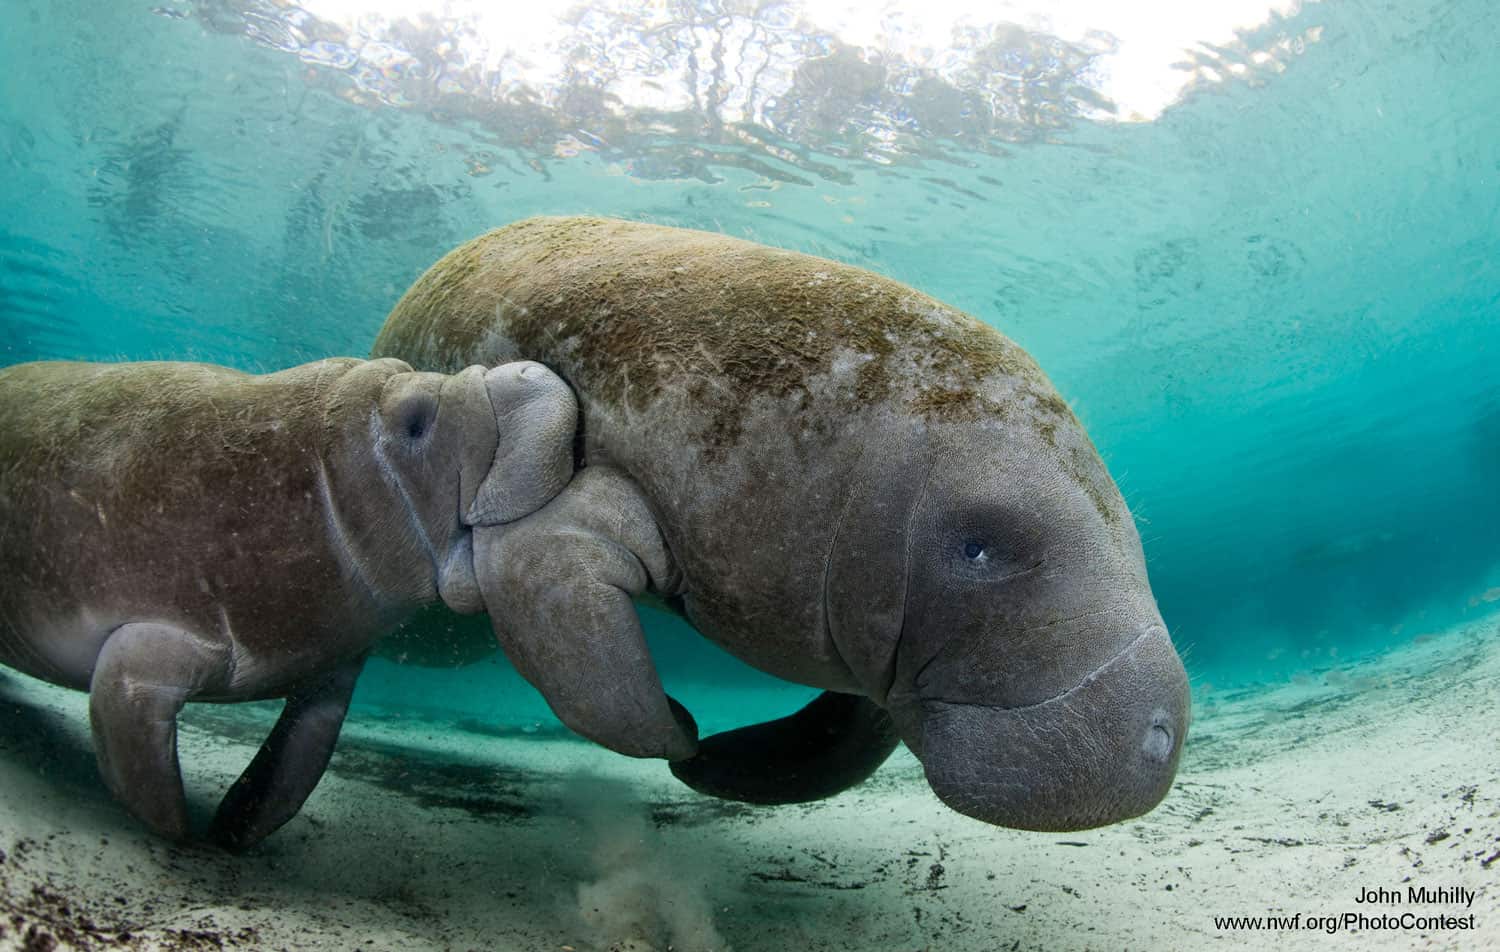 Leaking Phosphate Plant Puts Tampa Bay’s Manatees At Risk